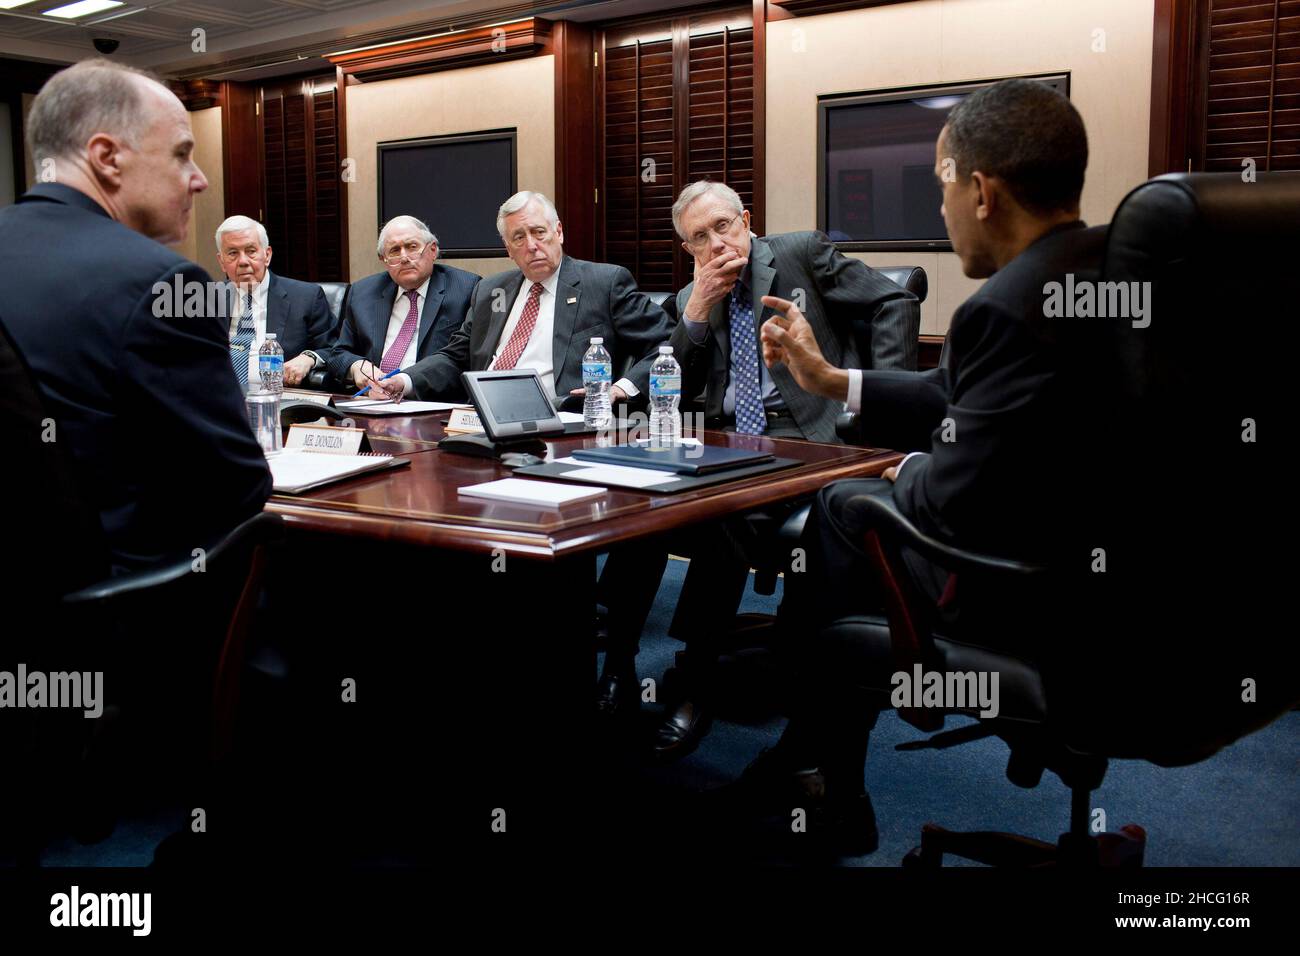 United States President Barack Obama meets with a bipartisan group of Congressional leaders on Libya in the Situation Room of the White House, March 18, 2011. Seated, from left, are: National Security Advisor Tom Donilon, U.S. Sen. Richard Lugar (Republican of Indiana), U.S. Senator Carl Levin (Democrat of Michigan), U.S. Representative Steny Hoyer (Democrat of Maryland), and U.S. Senate Majority Leader Harry Reid (Democrat of Nevada).Mandatory Credit: Pete Souza - White House via CNP Stock Photo